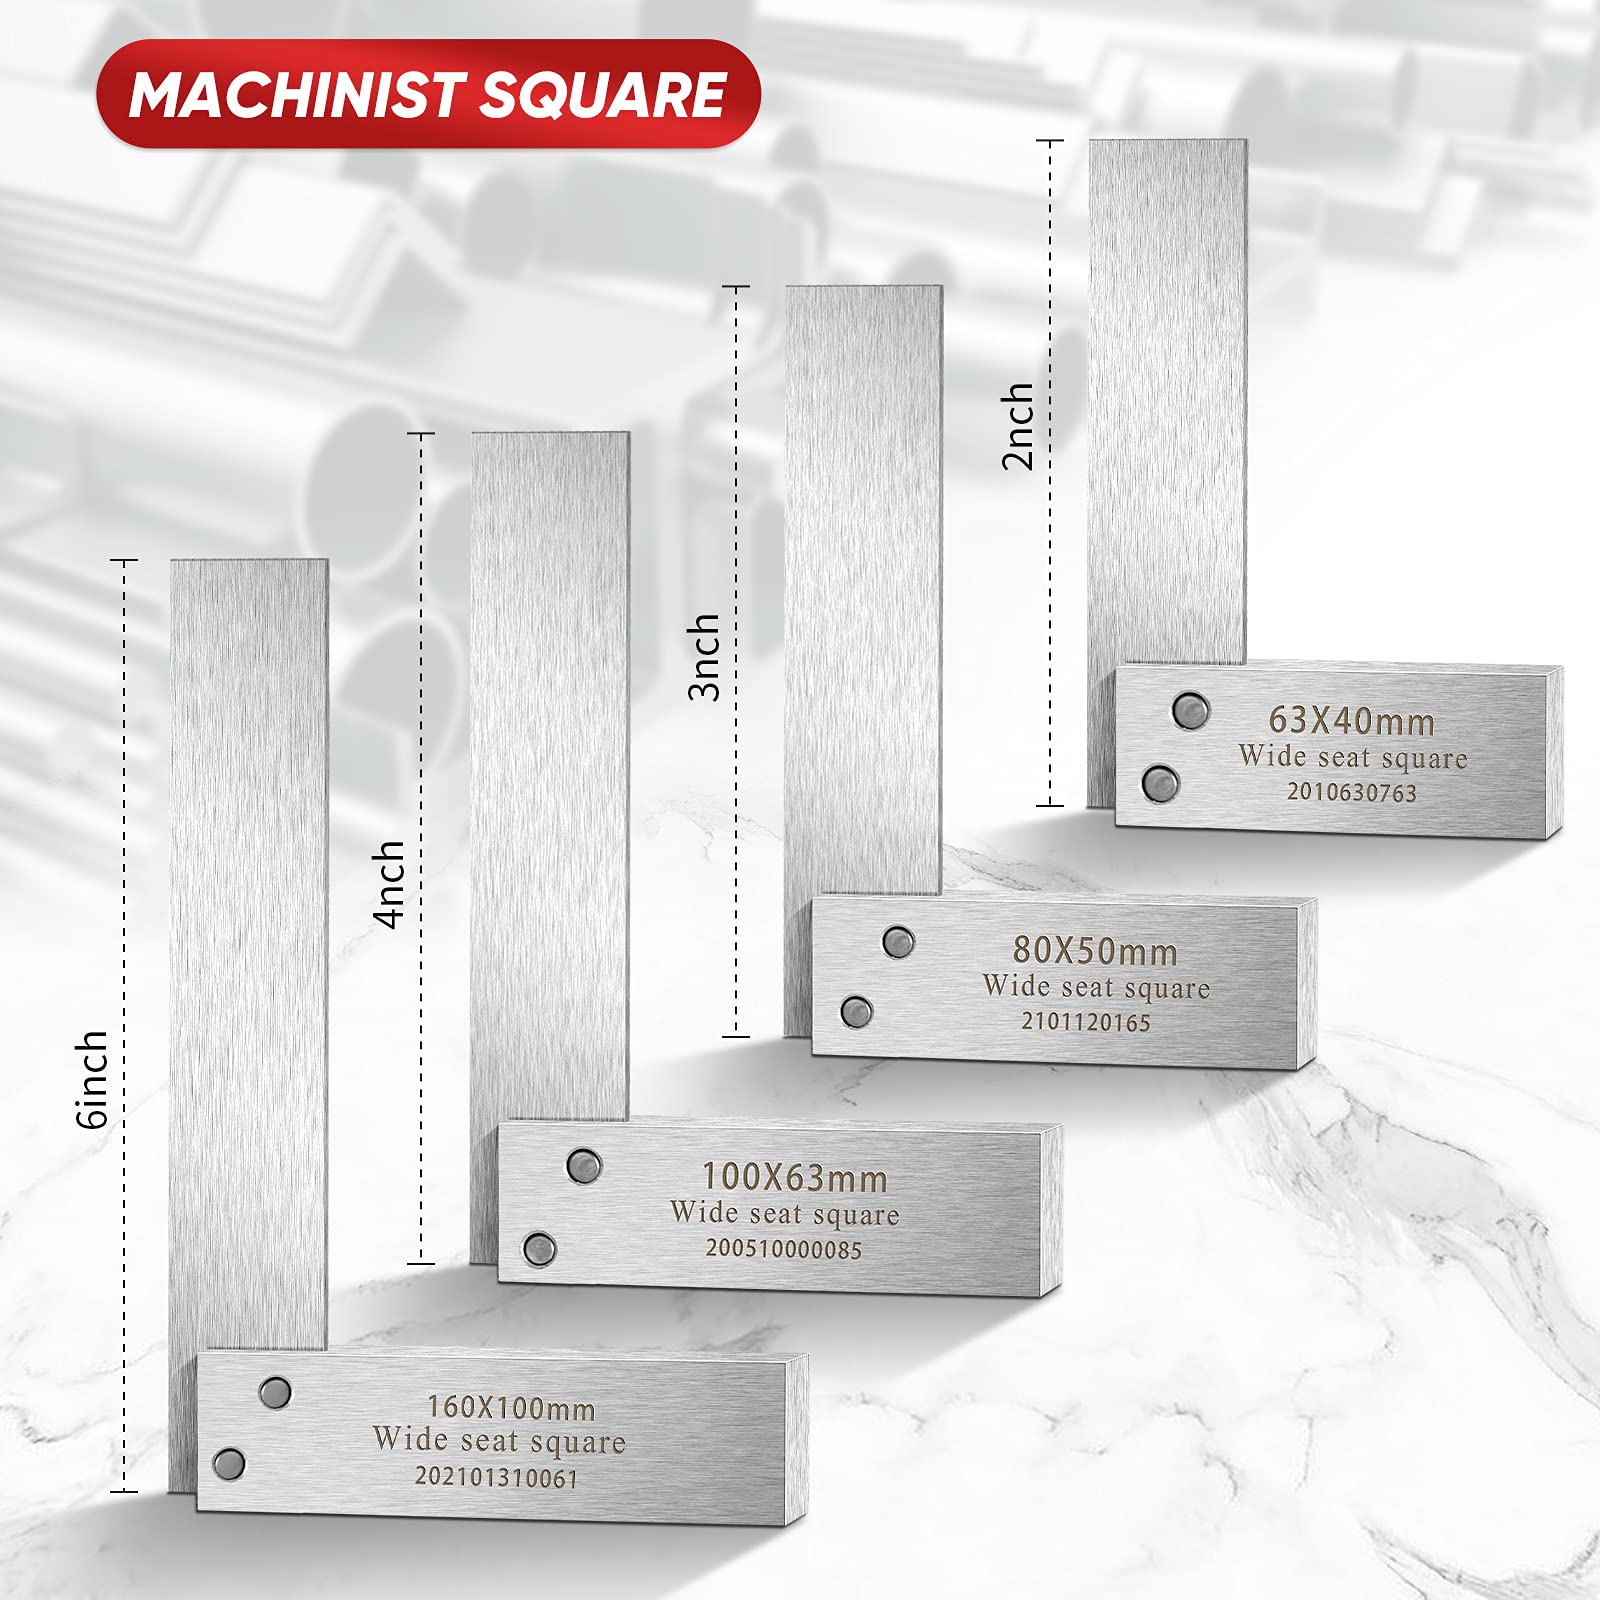 Machinist Square Set, 2, 3, 4 and 6 Squares Machinist Square Mechanical Engineer Steel Square High Precision 90 Degree Wide Base Square Tool L-type Testing Measuring Tool